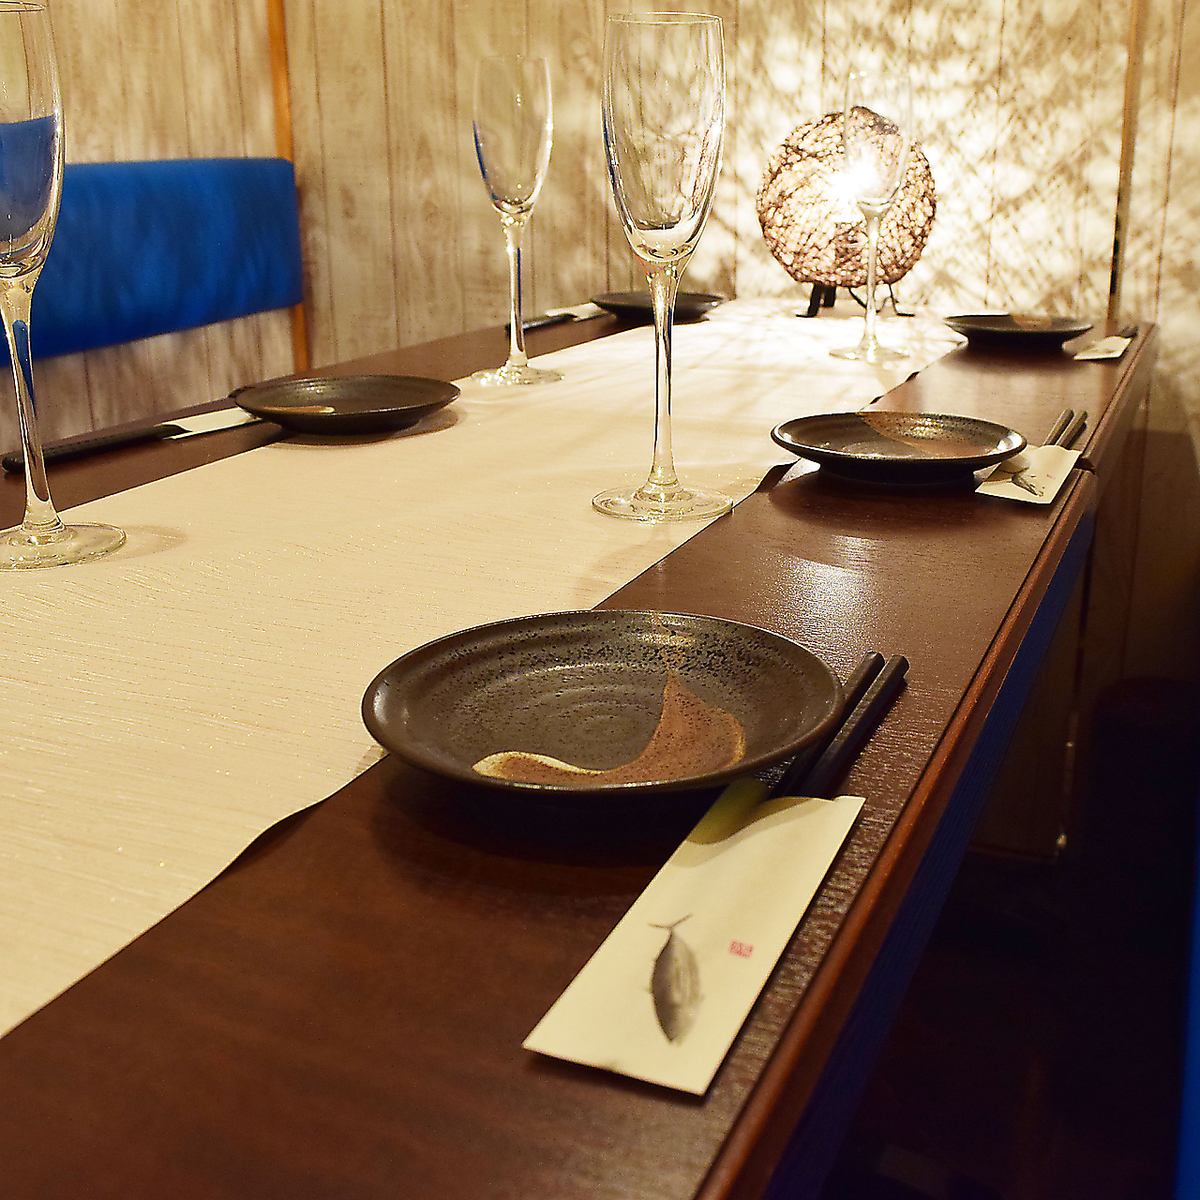 We also have private room seating for just two people♪